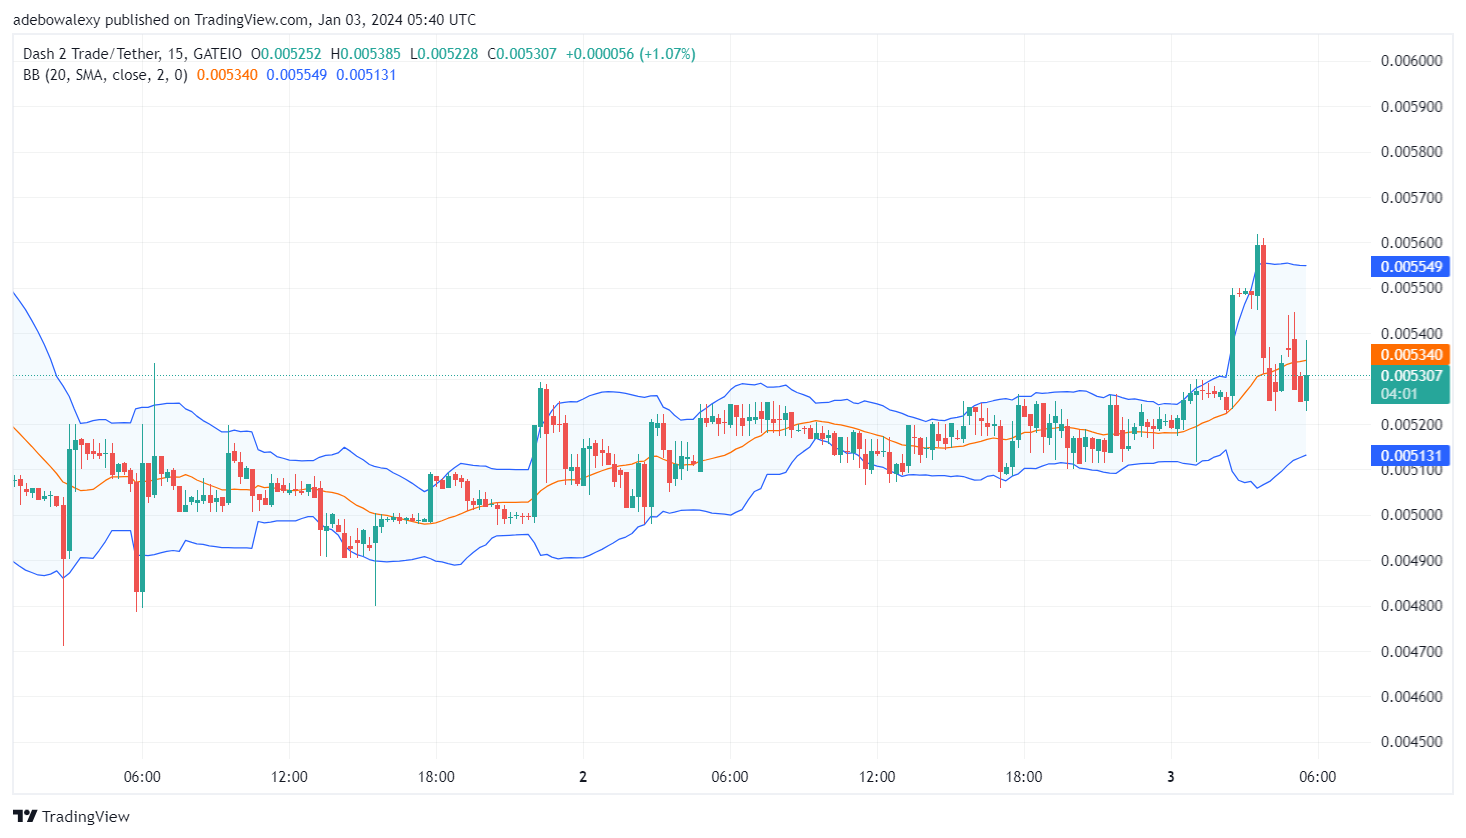 Dash 2 Trade Price Prediction for April 16: Dash 2 Trade Buyers Regroup at a Technical Support